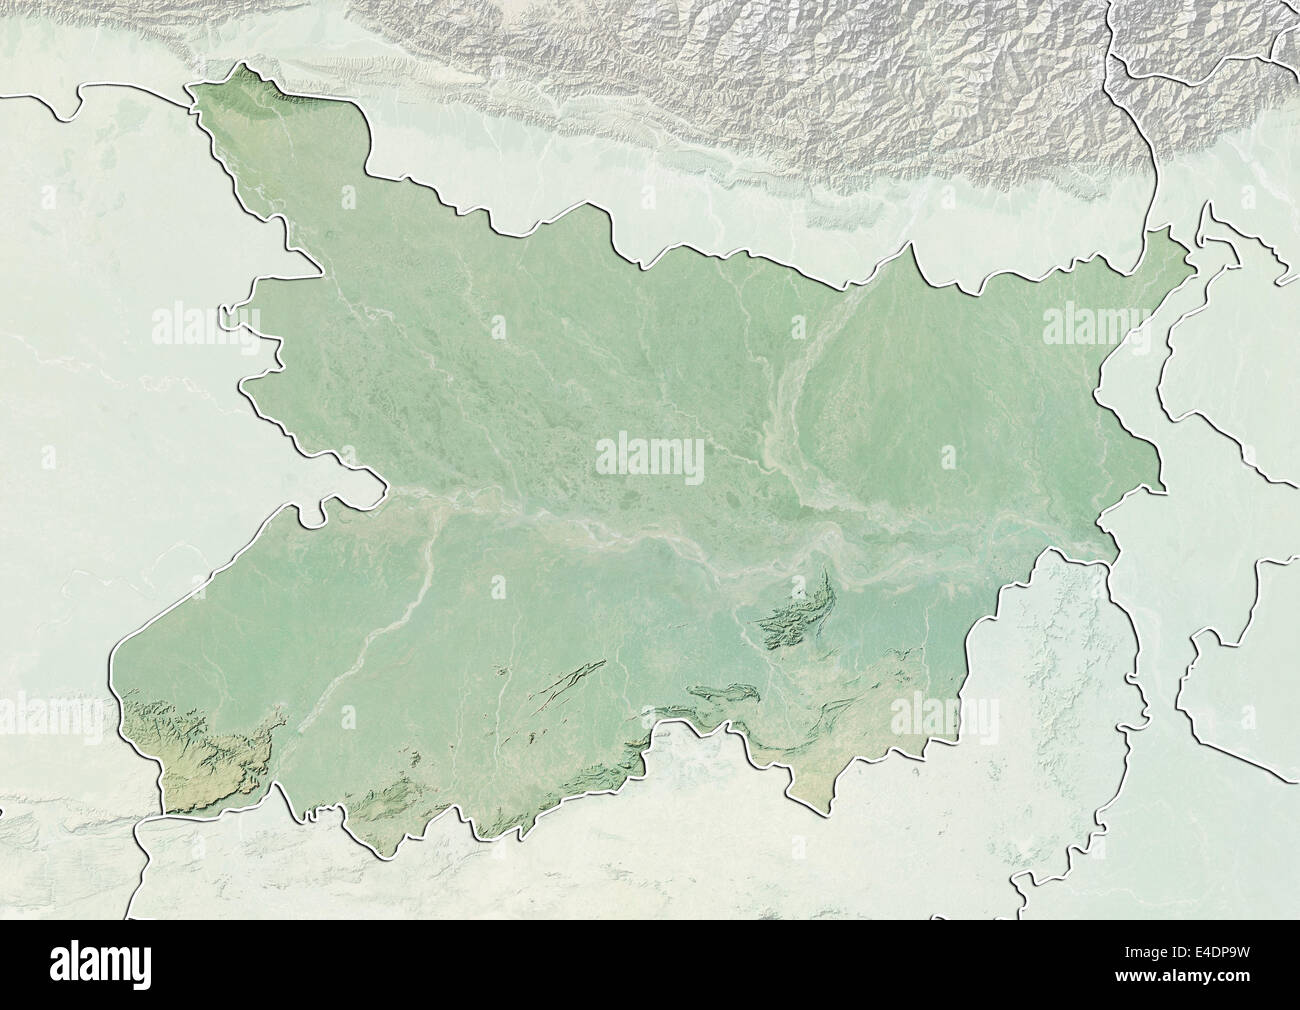 State of Bihar, India, Relief Map Stock Photo